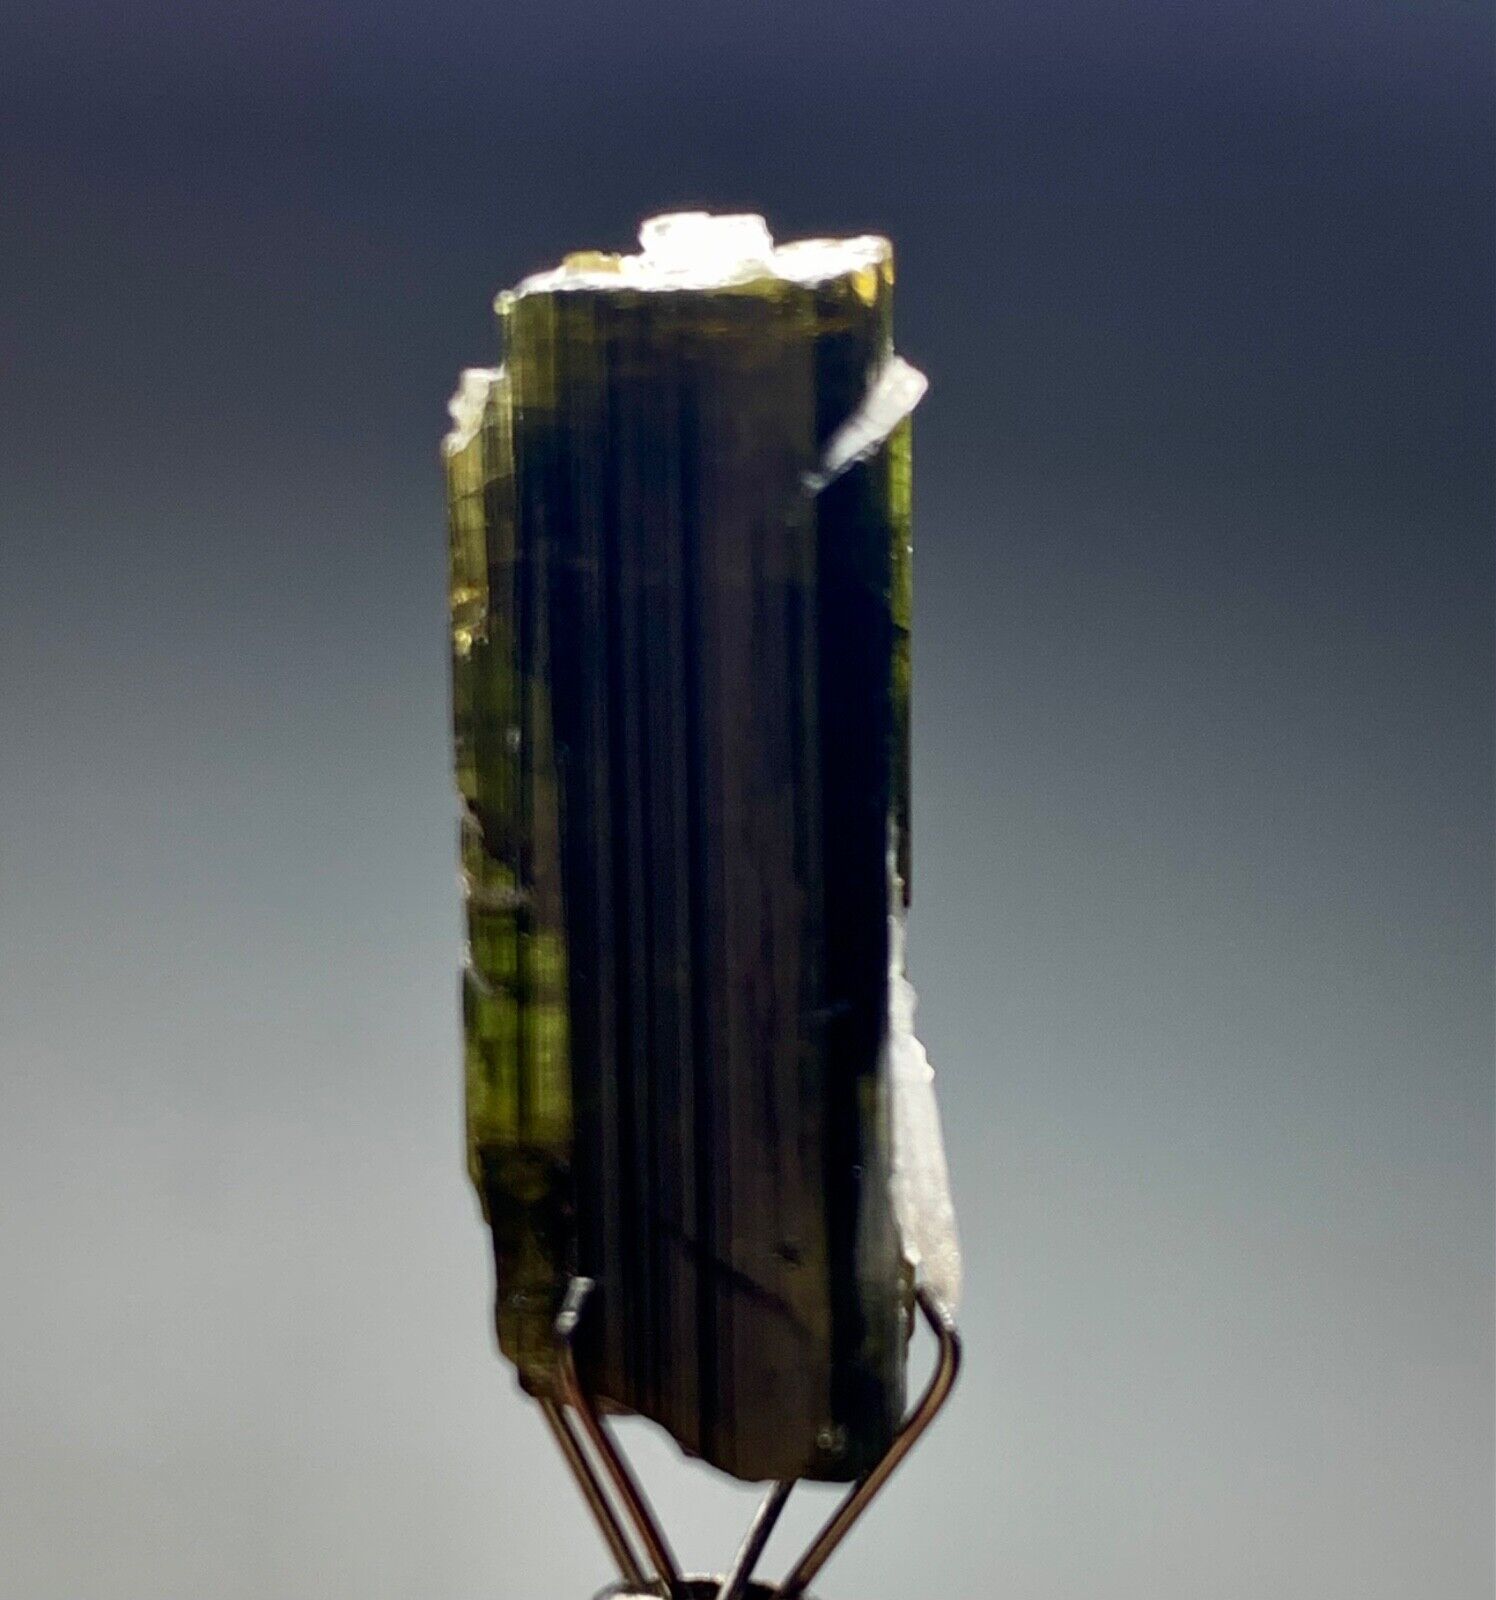 19 Cts Tourmaline Crystal Specimen from Afghanistan